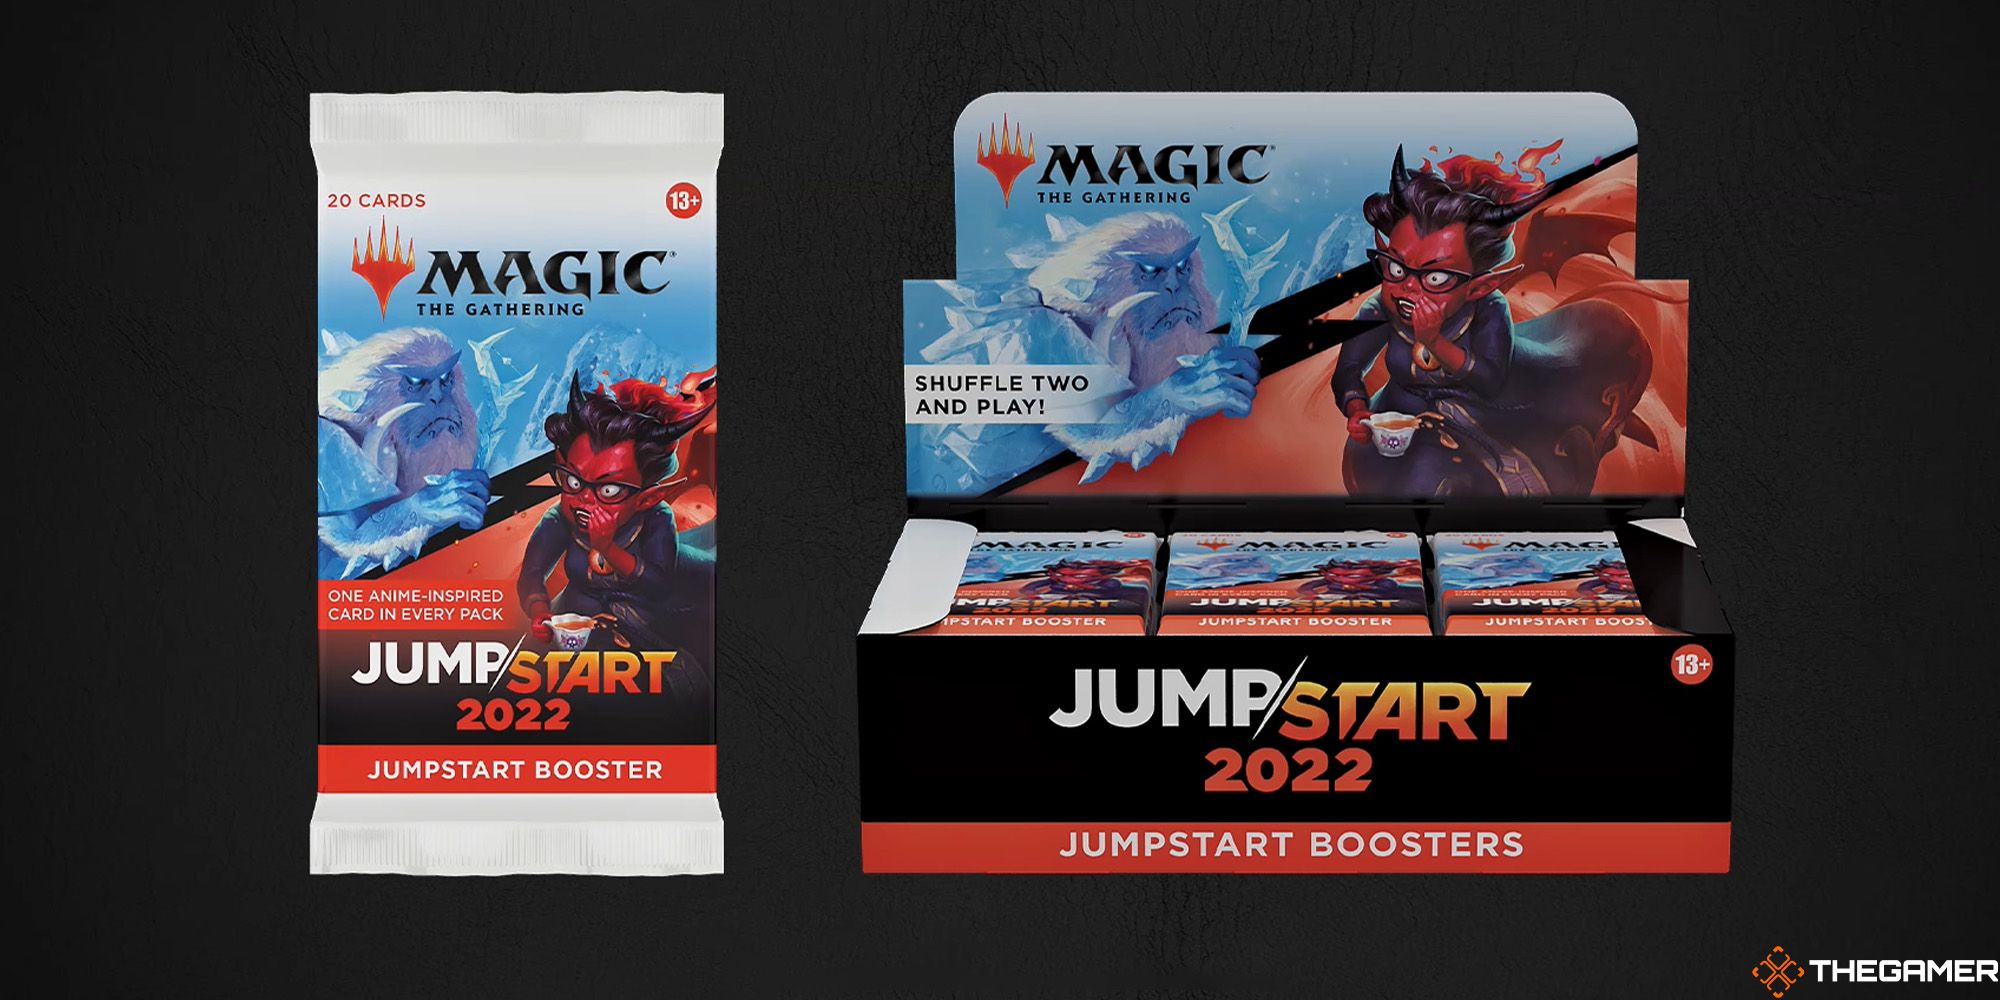 Magic: The Gathering's Jumpstart 2022 Launches December 2